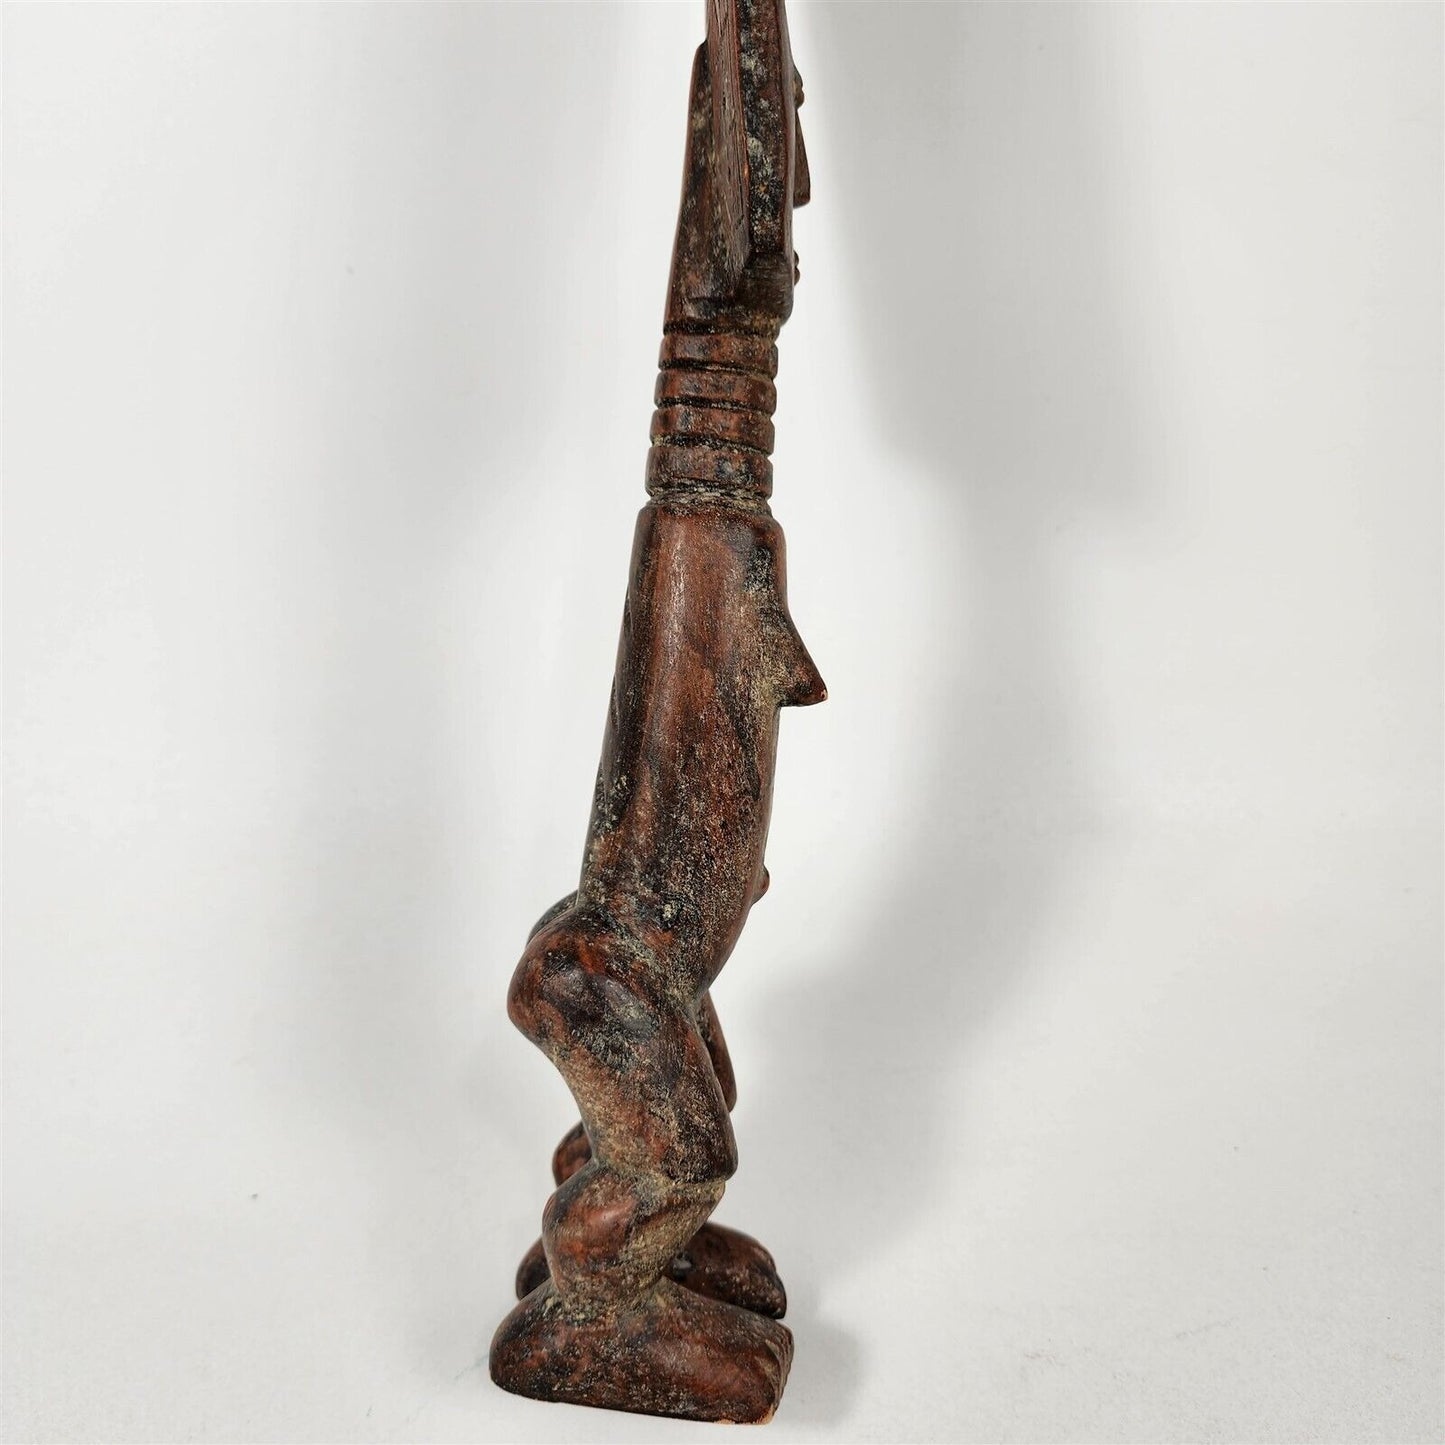 Vintage African Fertility Statue Carved Wood Tribal Art - 17 1/2" tall